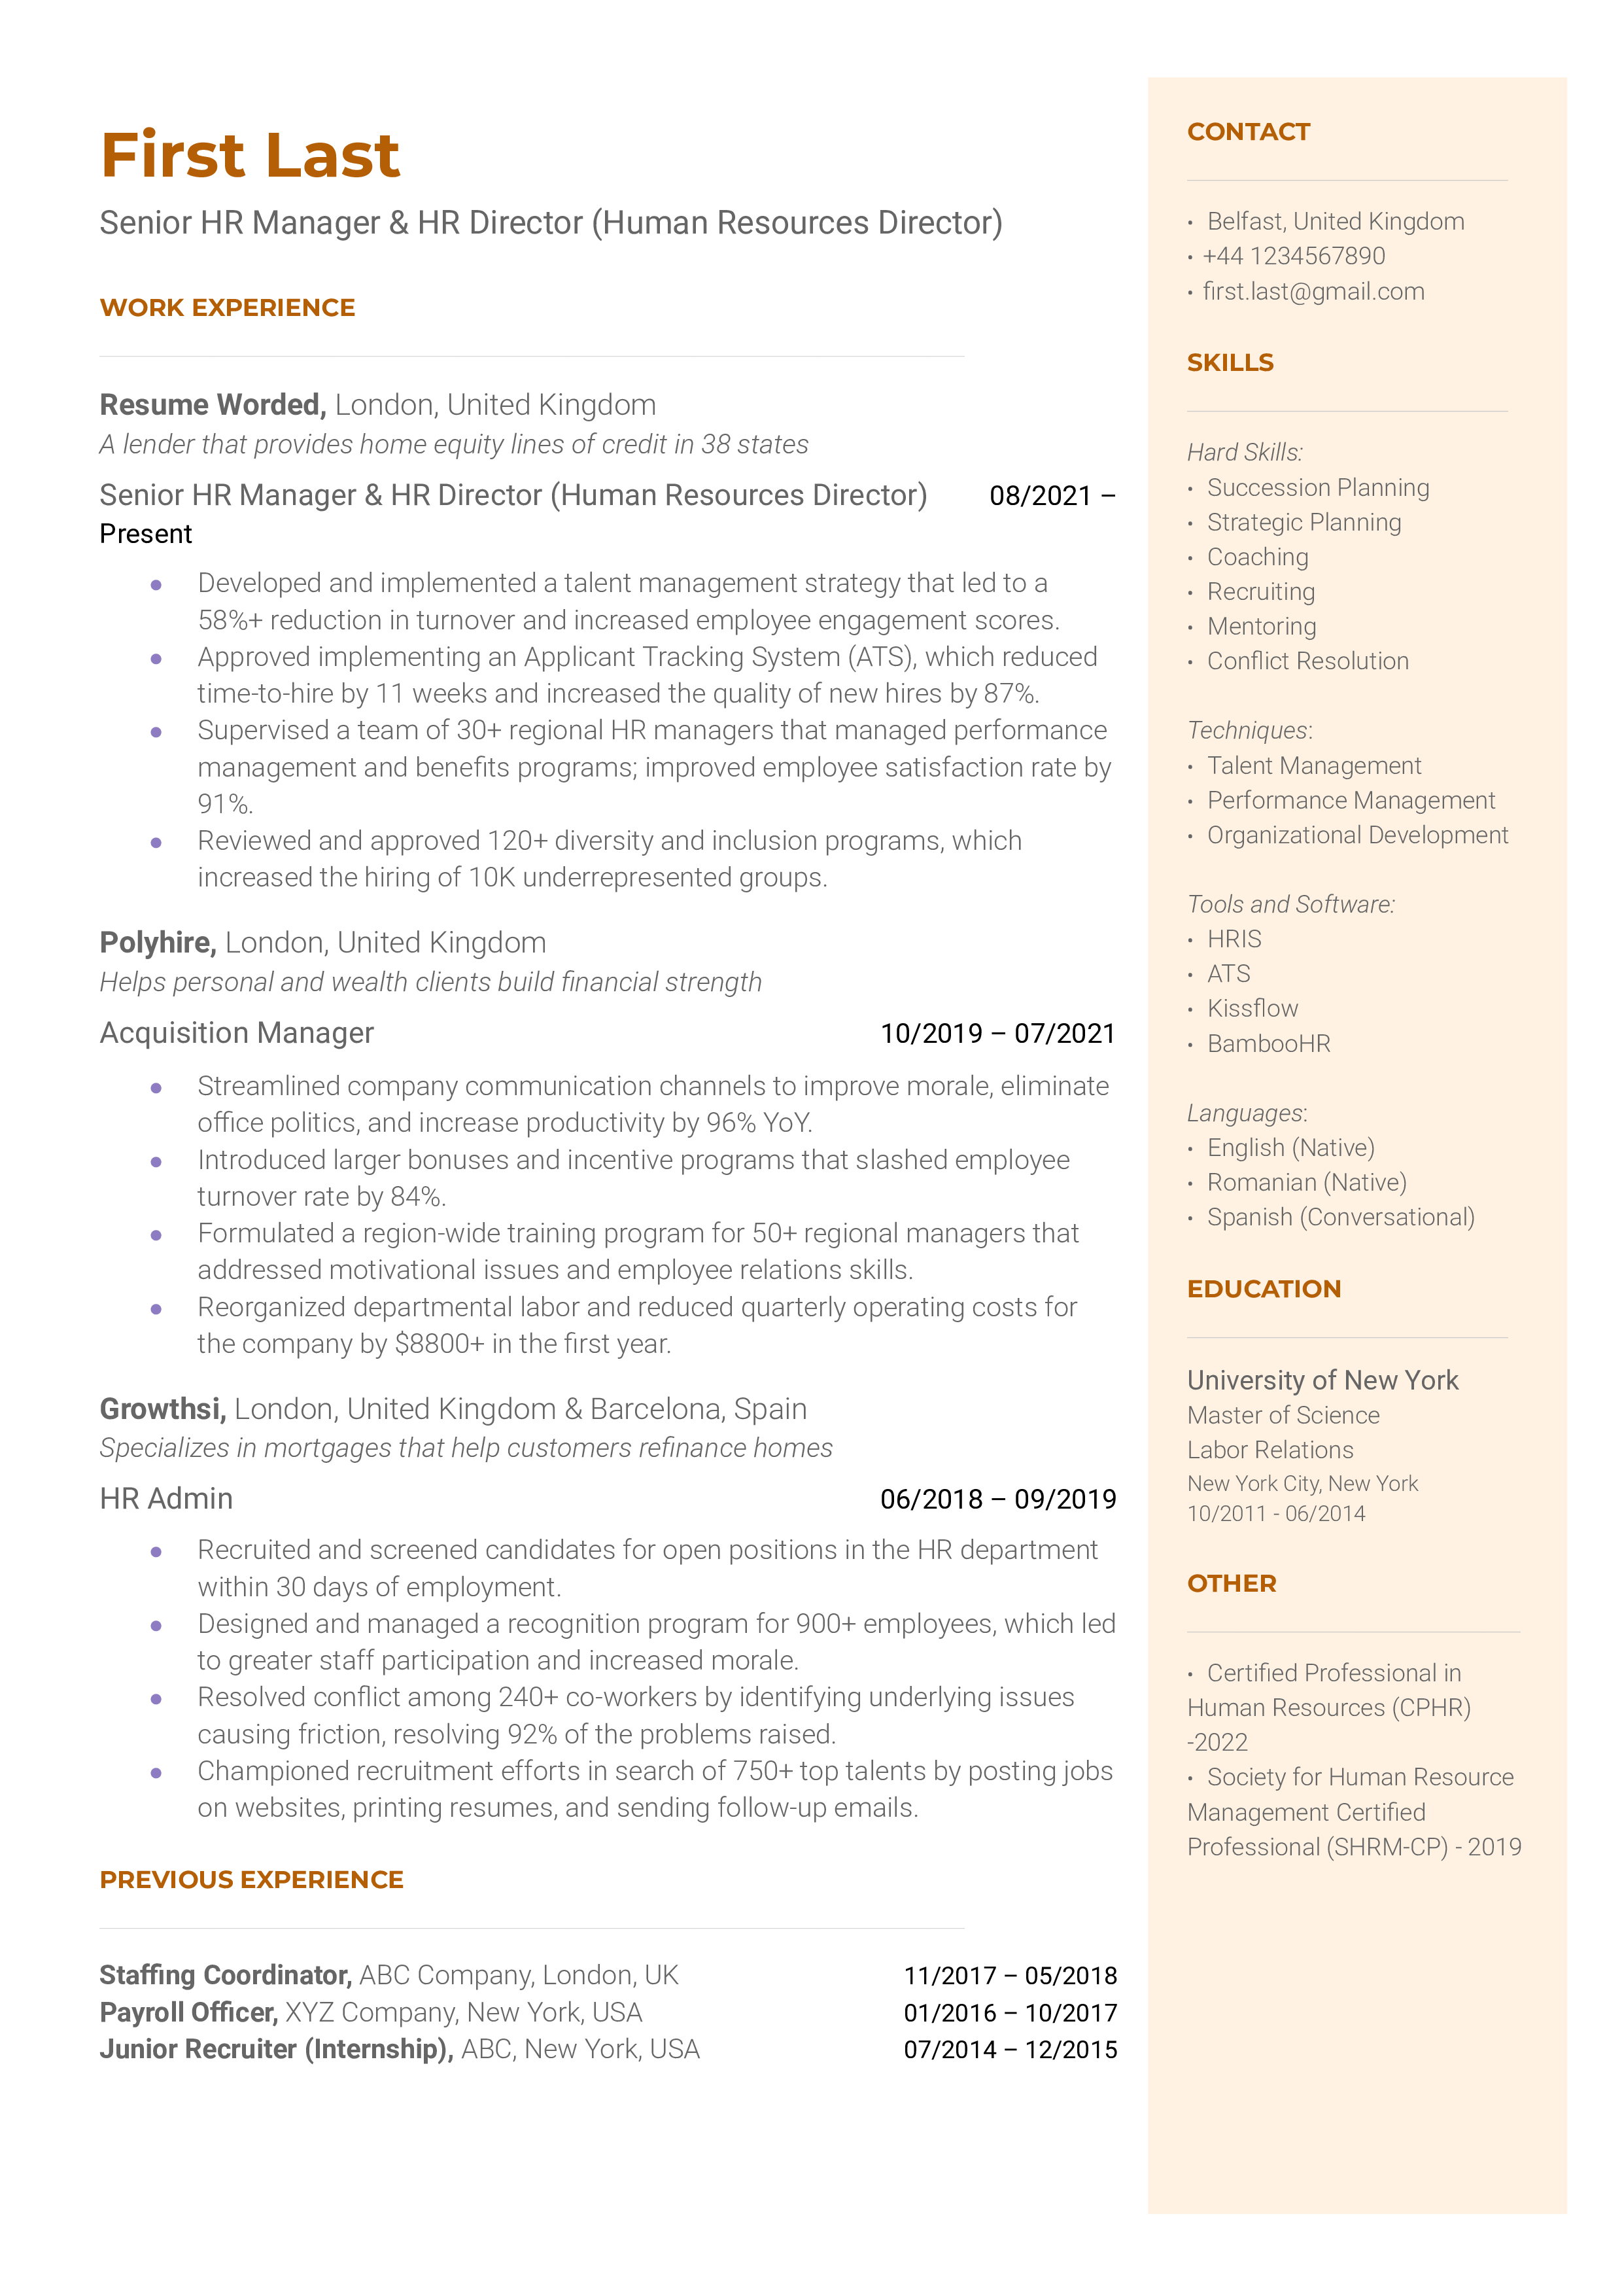 A resume sample for a Senior HR Manager or HR Director role